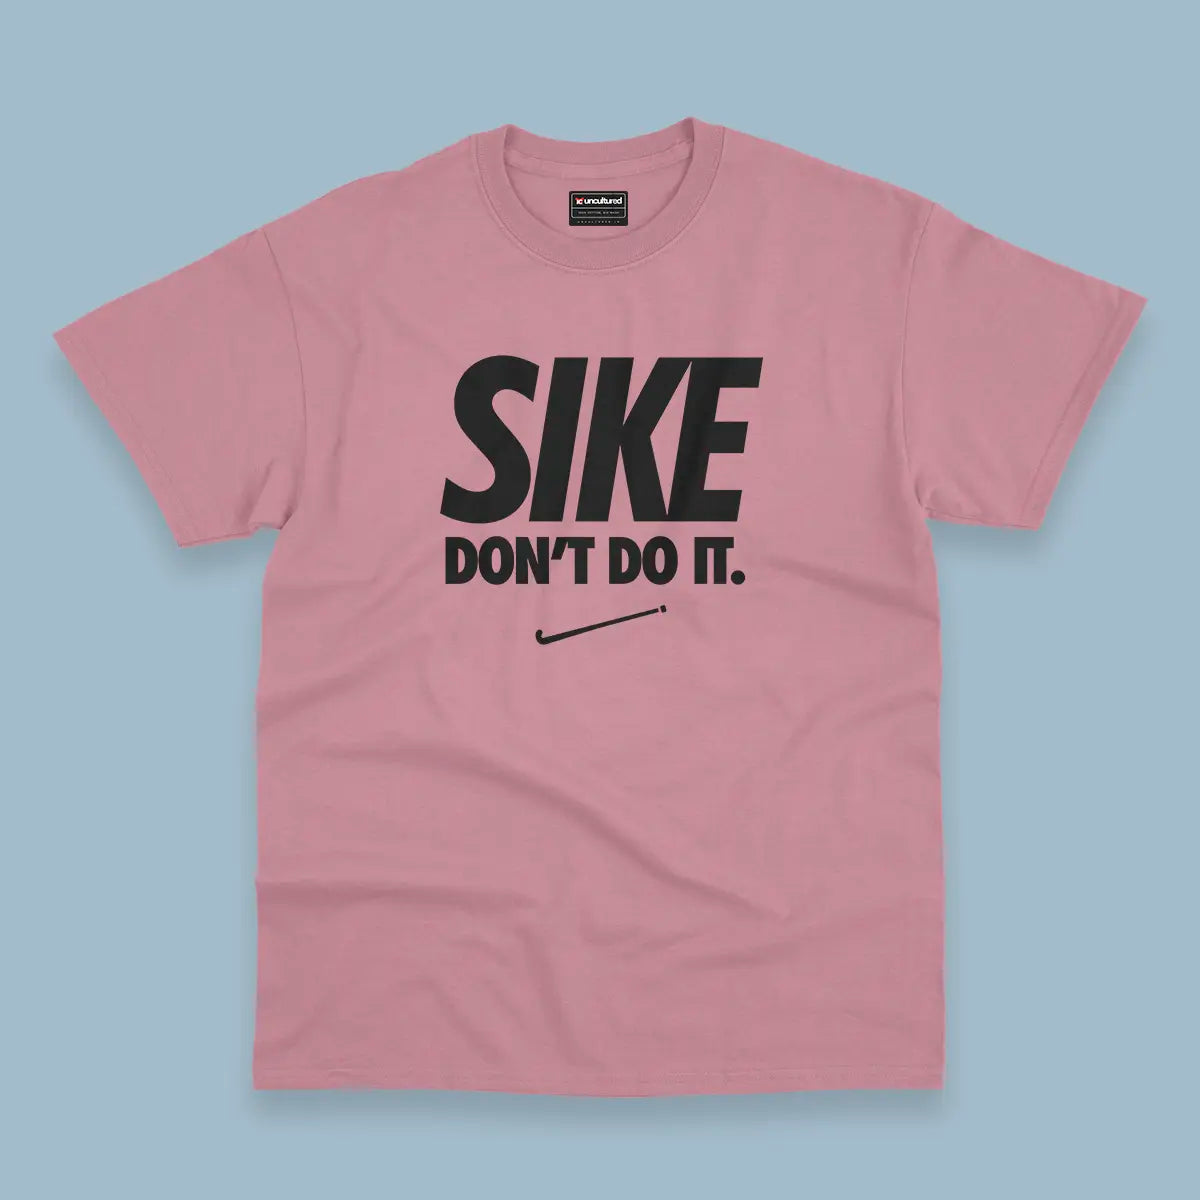 Sike don't do it - Oversized